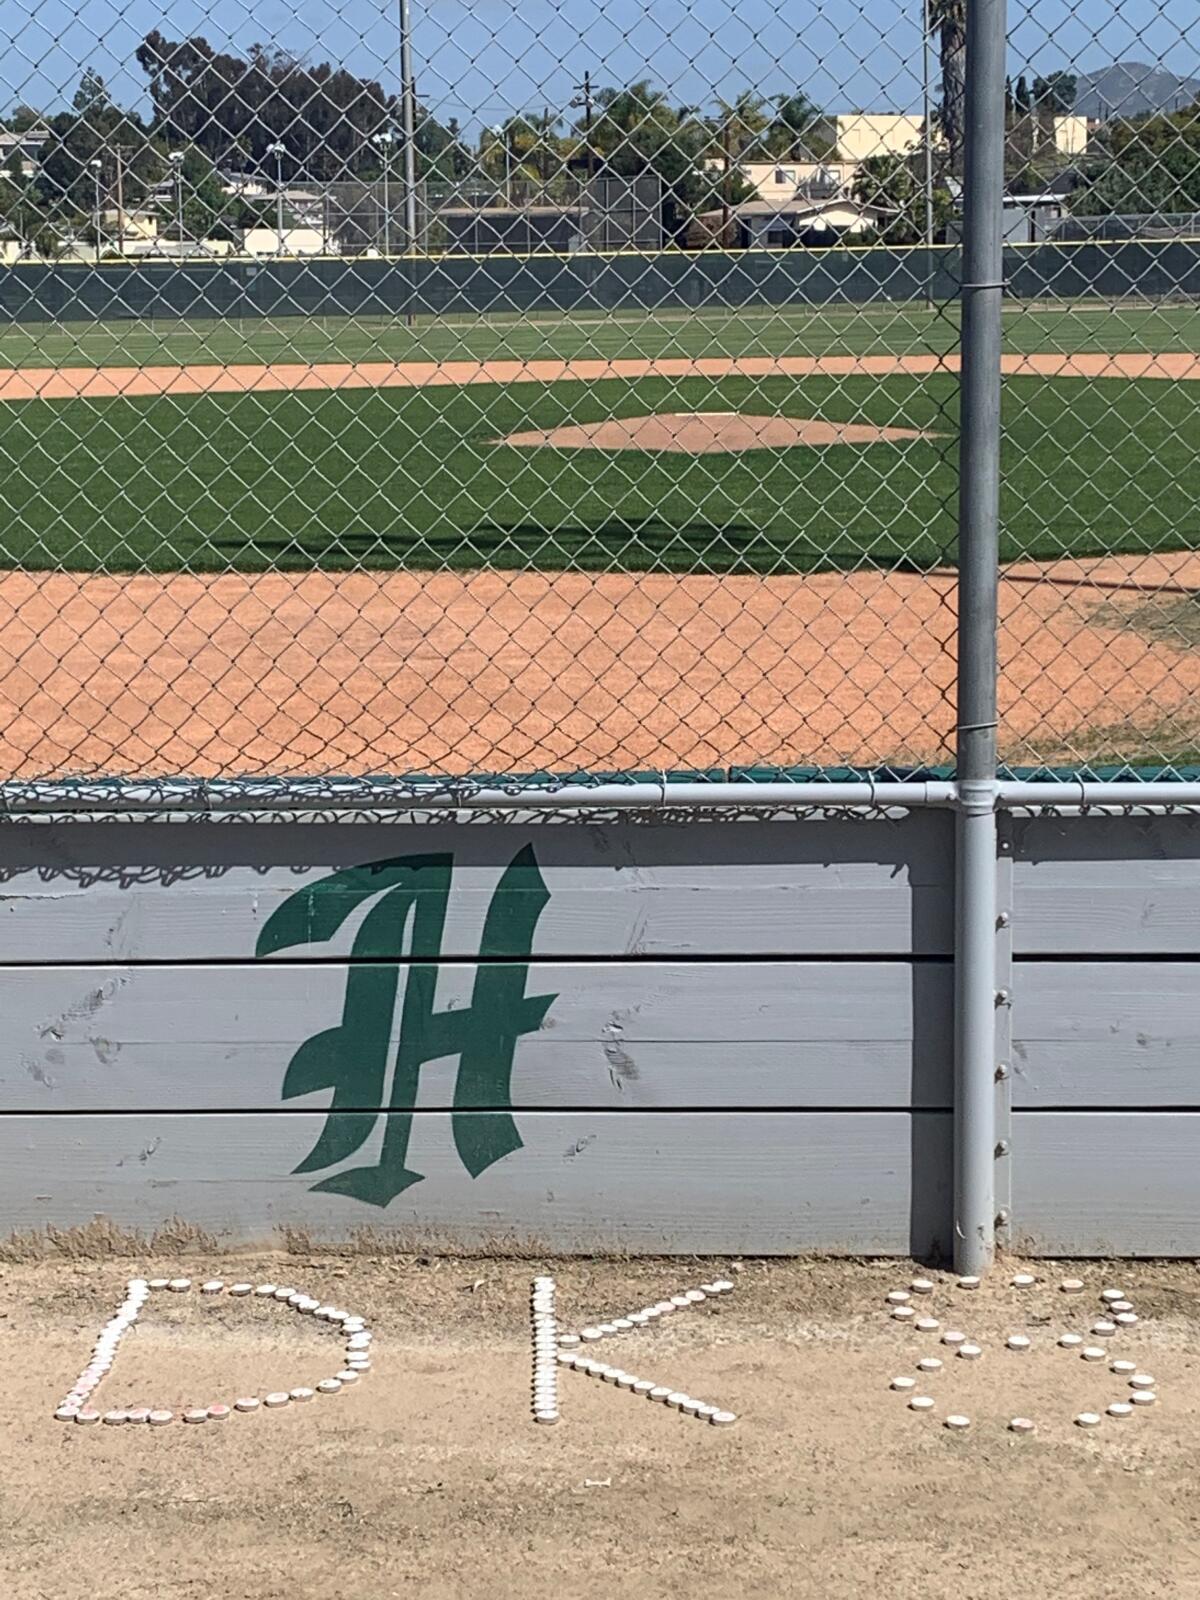 A memorial near the Helix High baseball field honors the memory of former Highlanders player Dylan King.